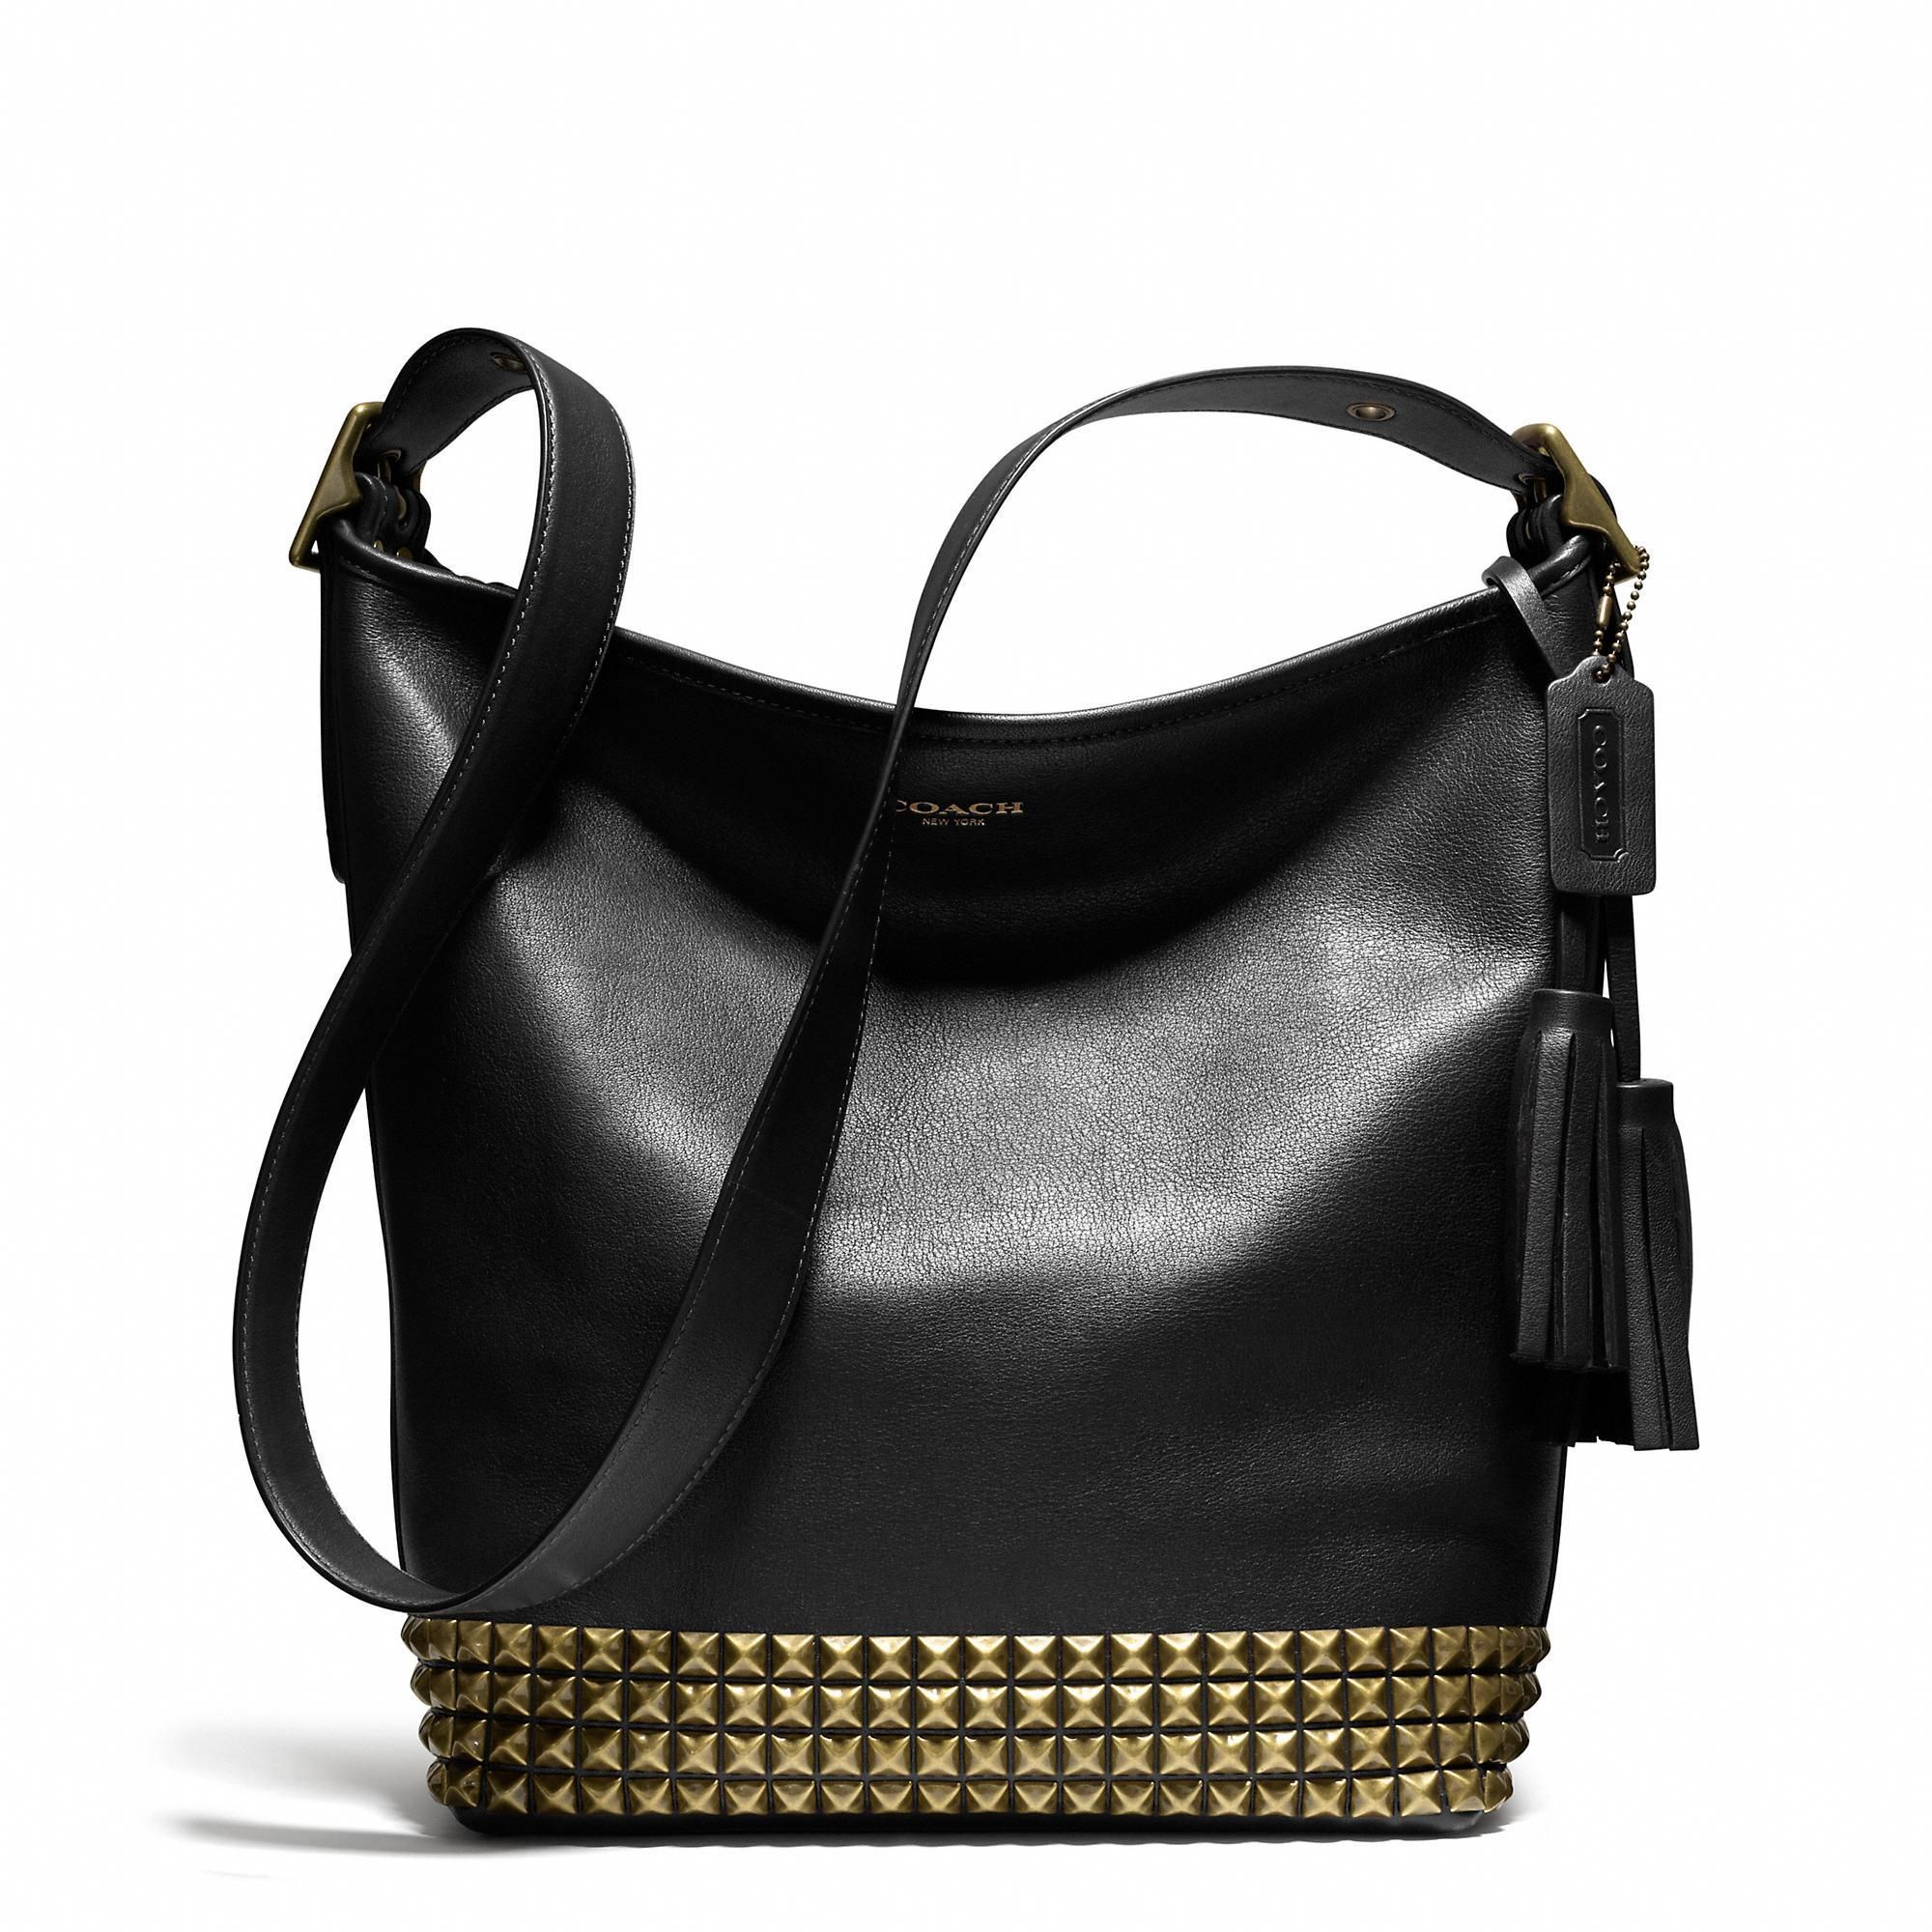 The Legacy Duffle in Studded Leather from Coach